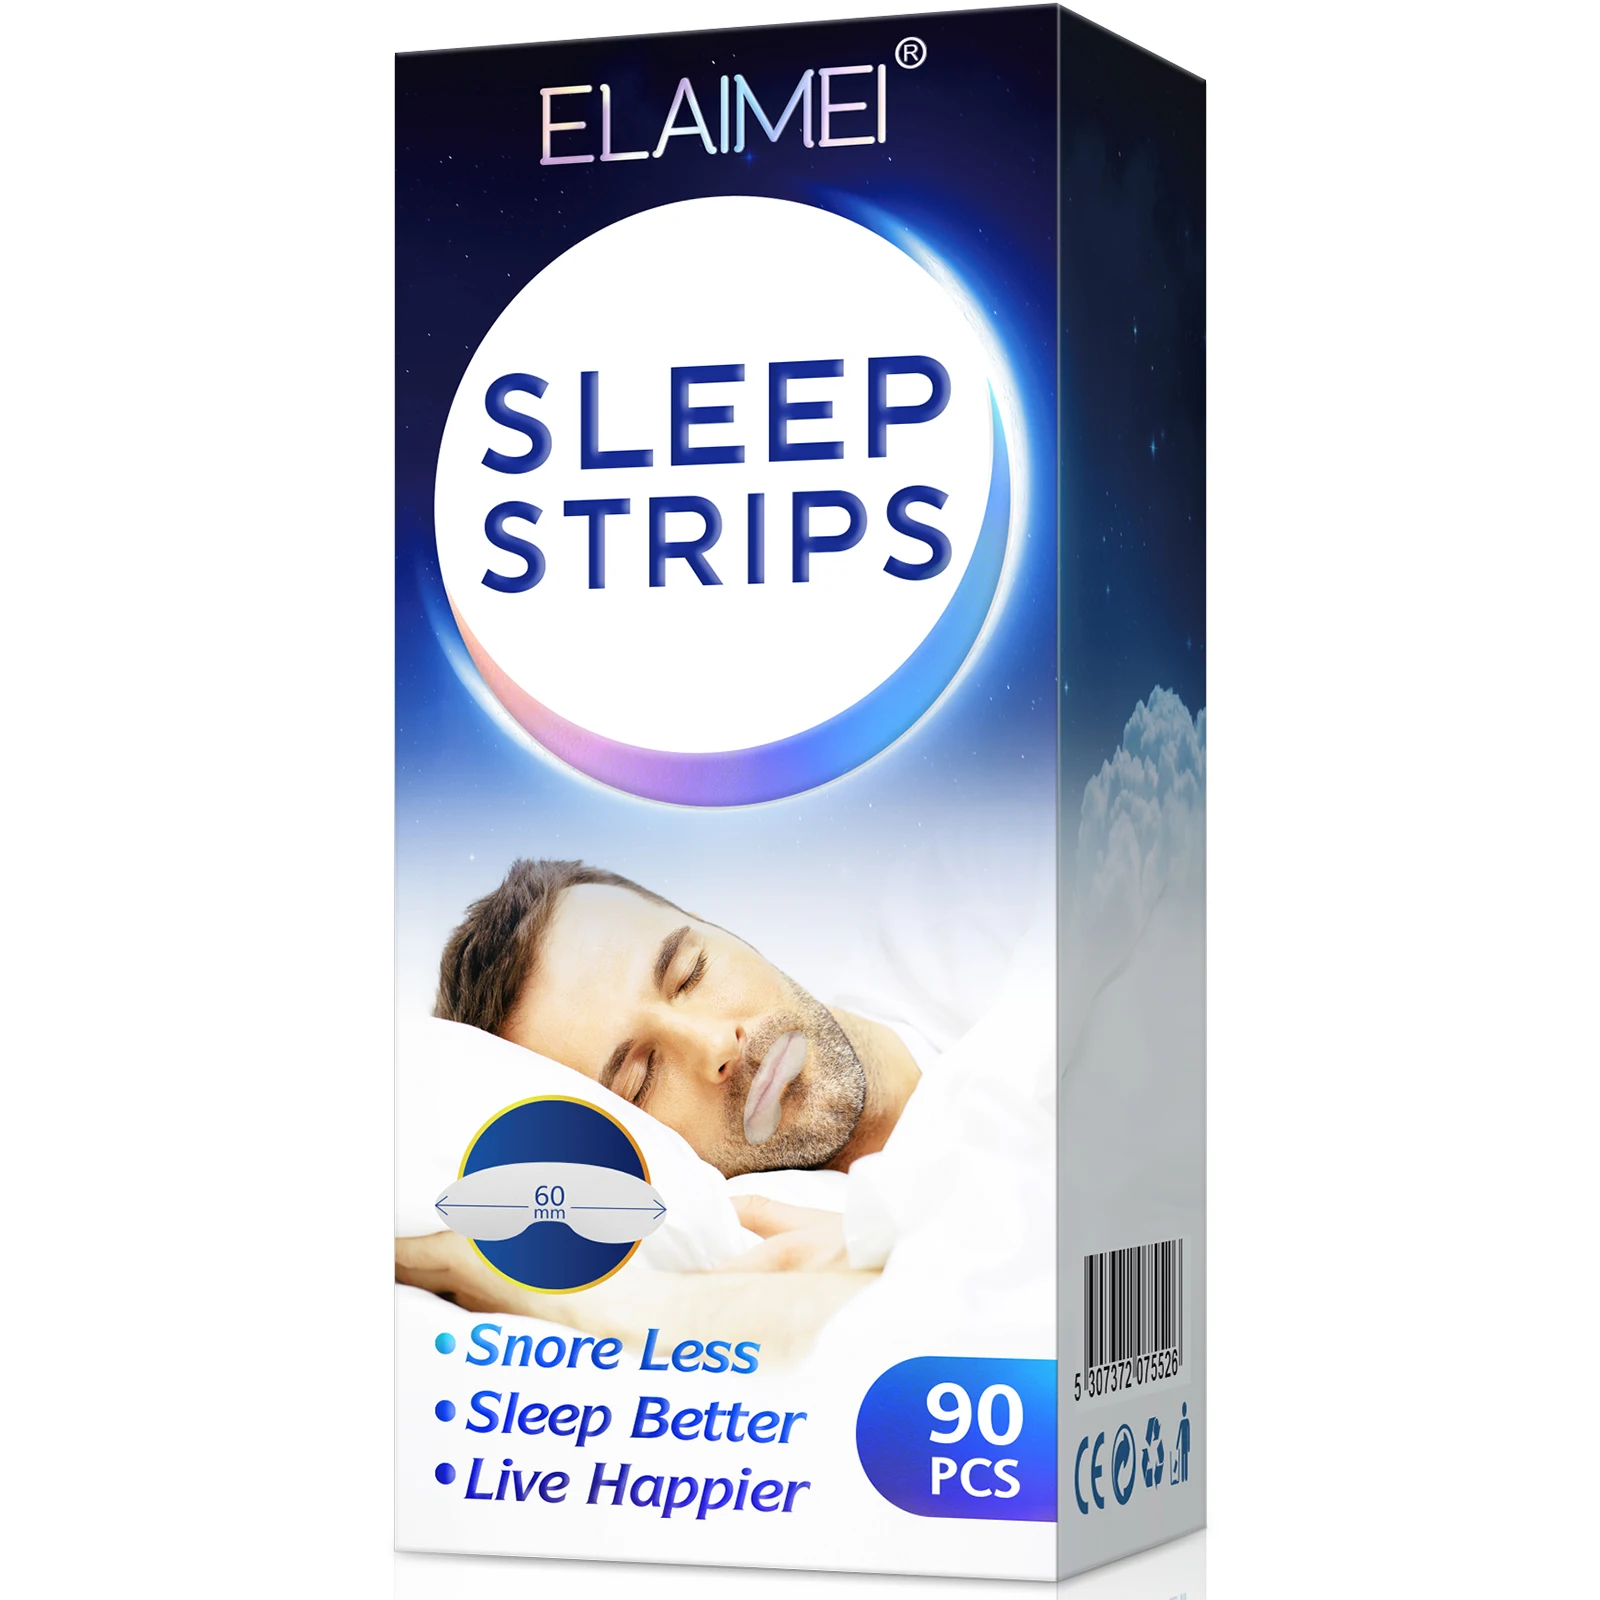 

ELAIMEI High Quality Sleep Strips 90 Pcs Lip Shape Mouth Tape Improves Sleep and Relieves Snoring